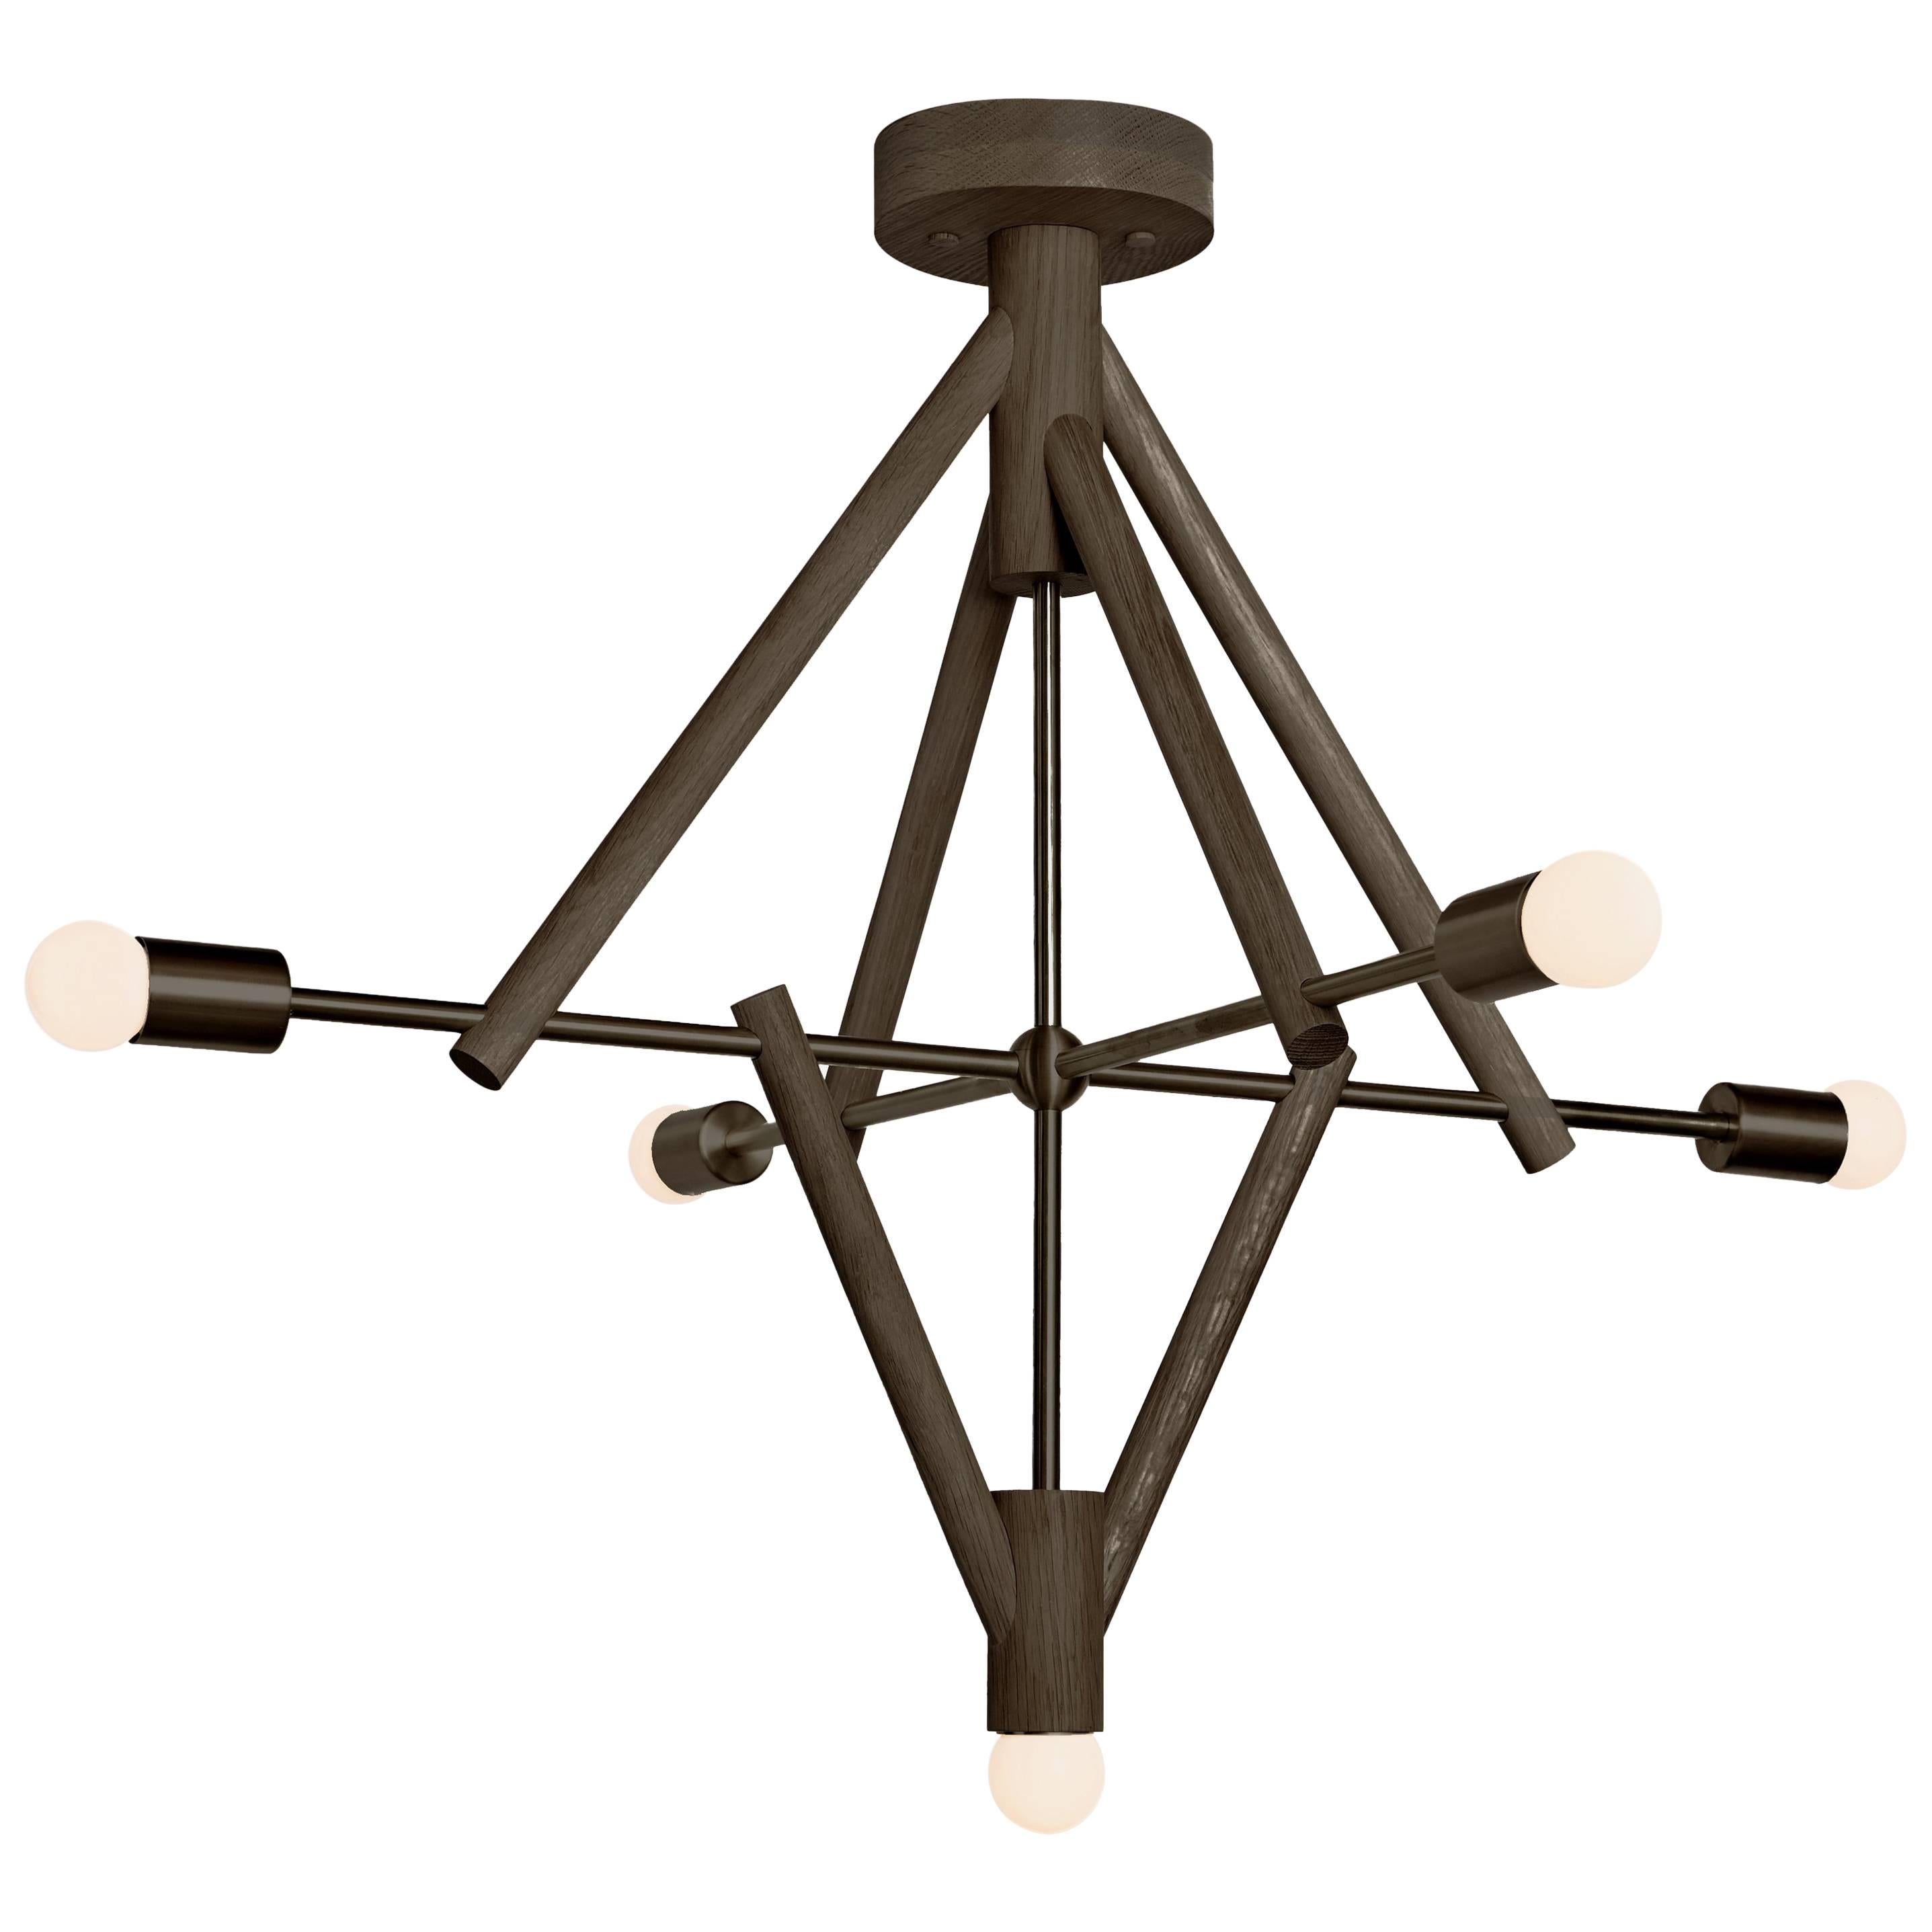 Workstead Lodge Chandelier Five in Oxidized Ash and Blackened Steel